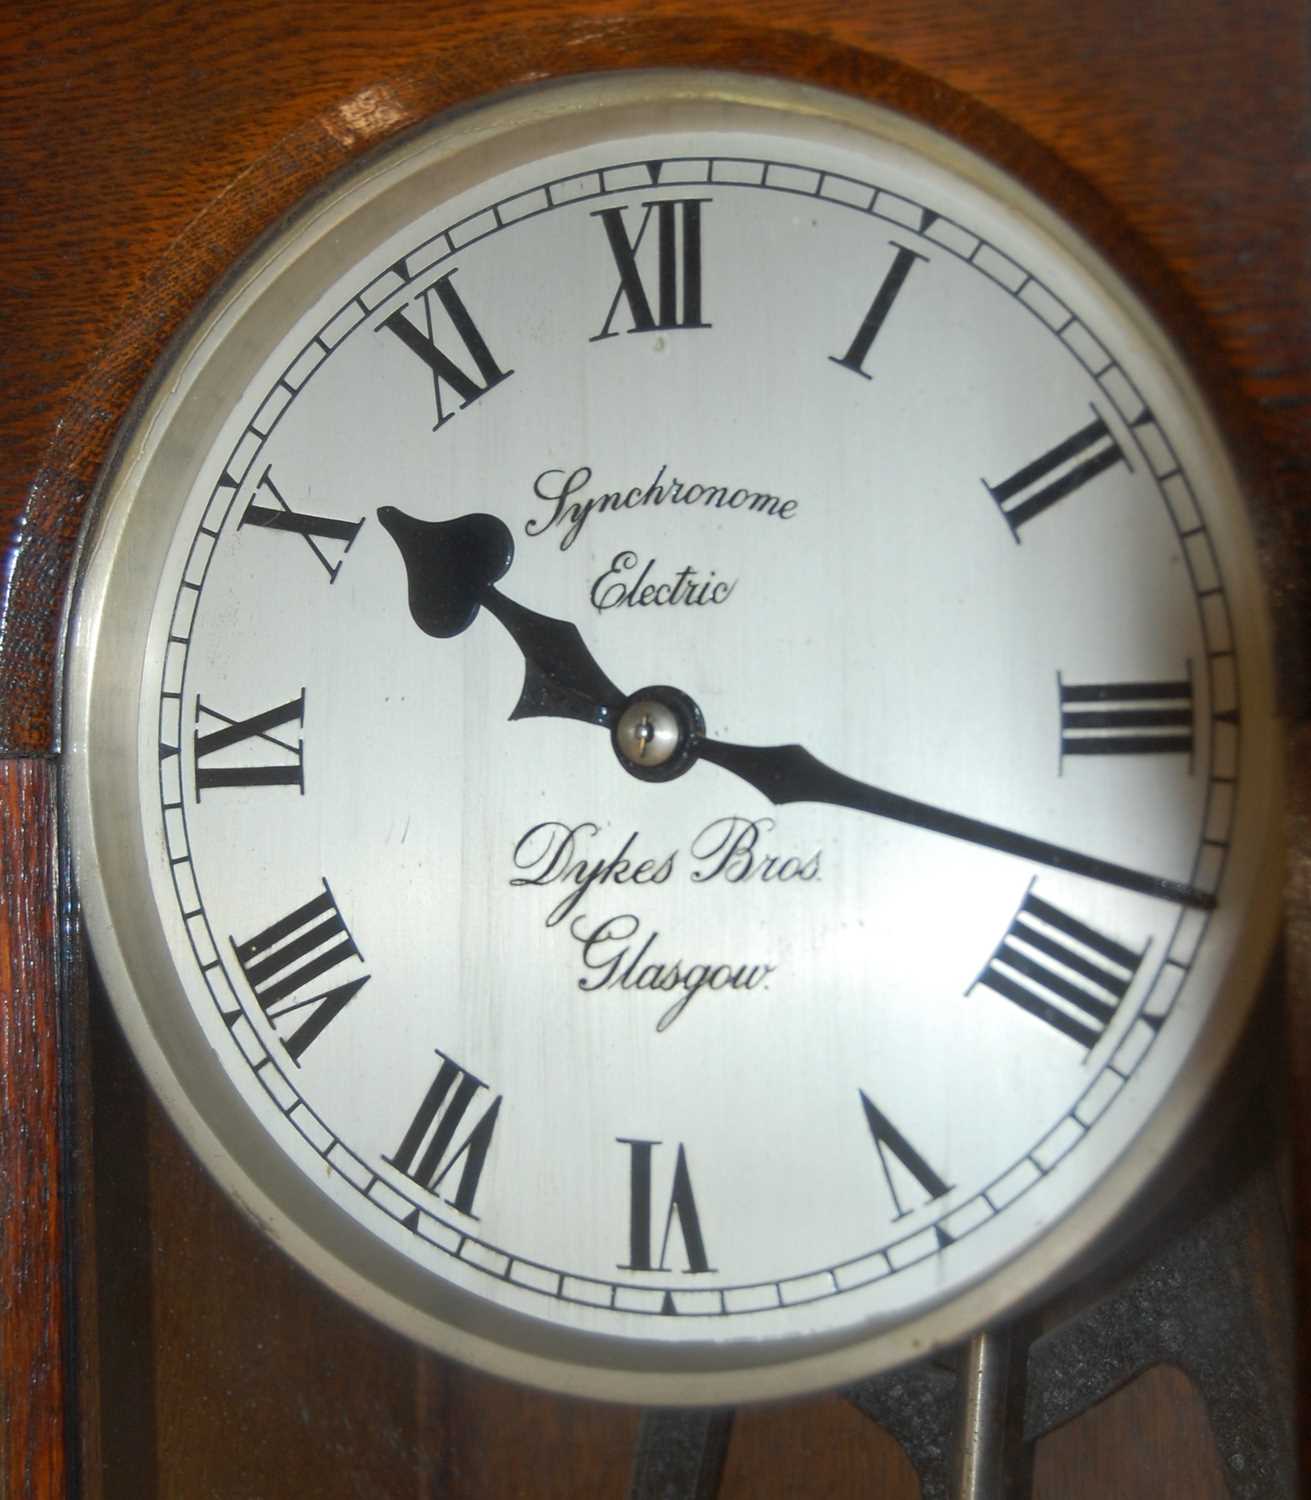 An oak cased Synchronome Electric wall clock, Dykes Bros. Glasgow, with silvered Roman numeral dial - Image 2 of 2